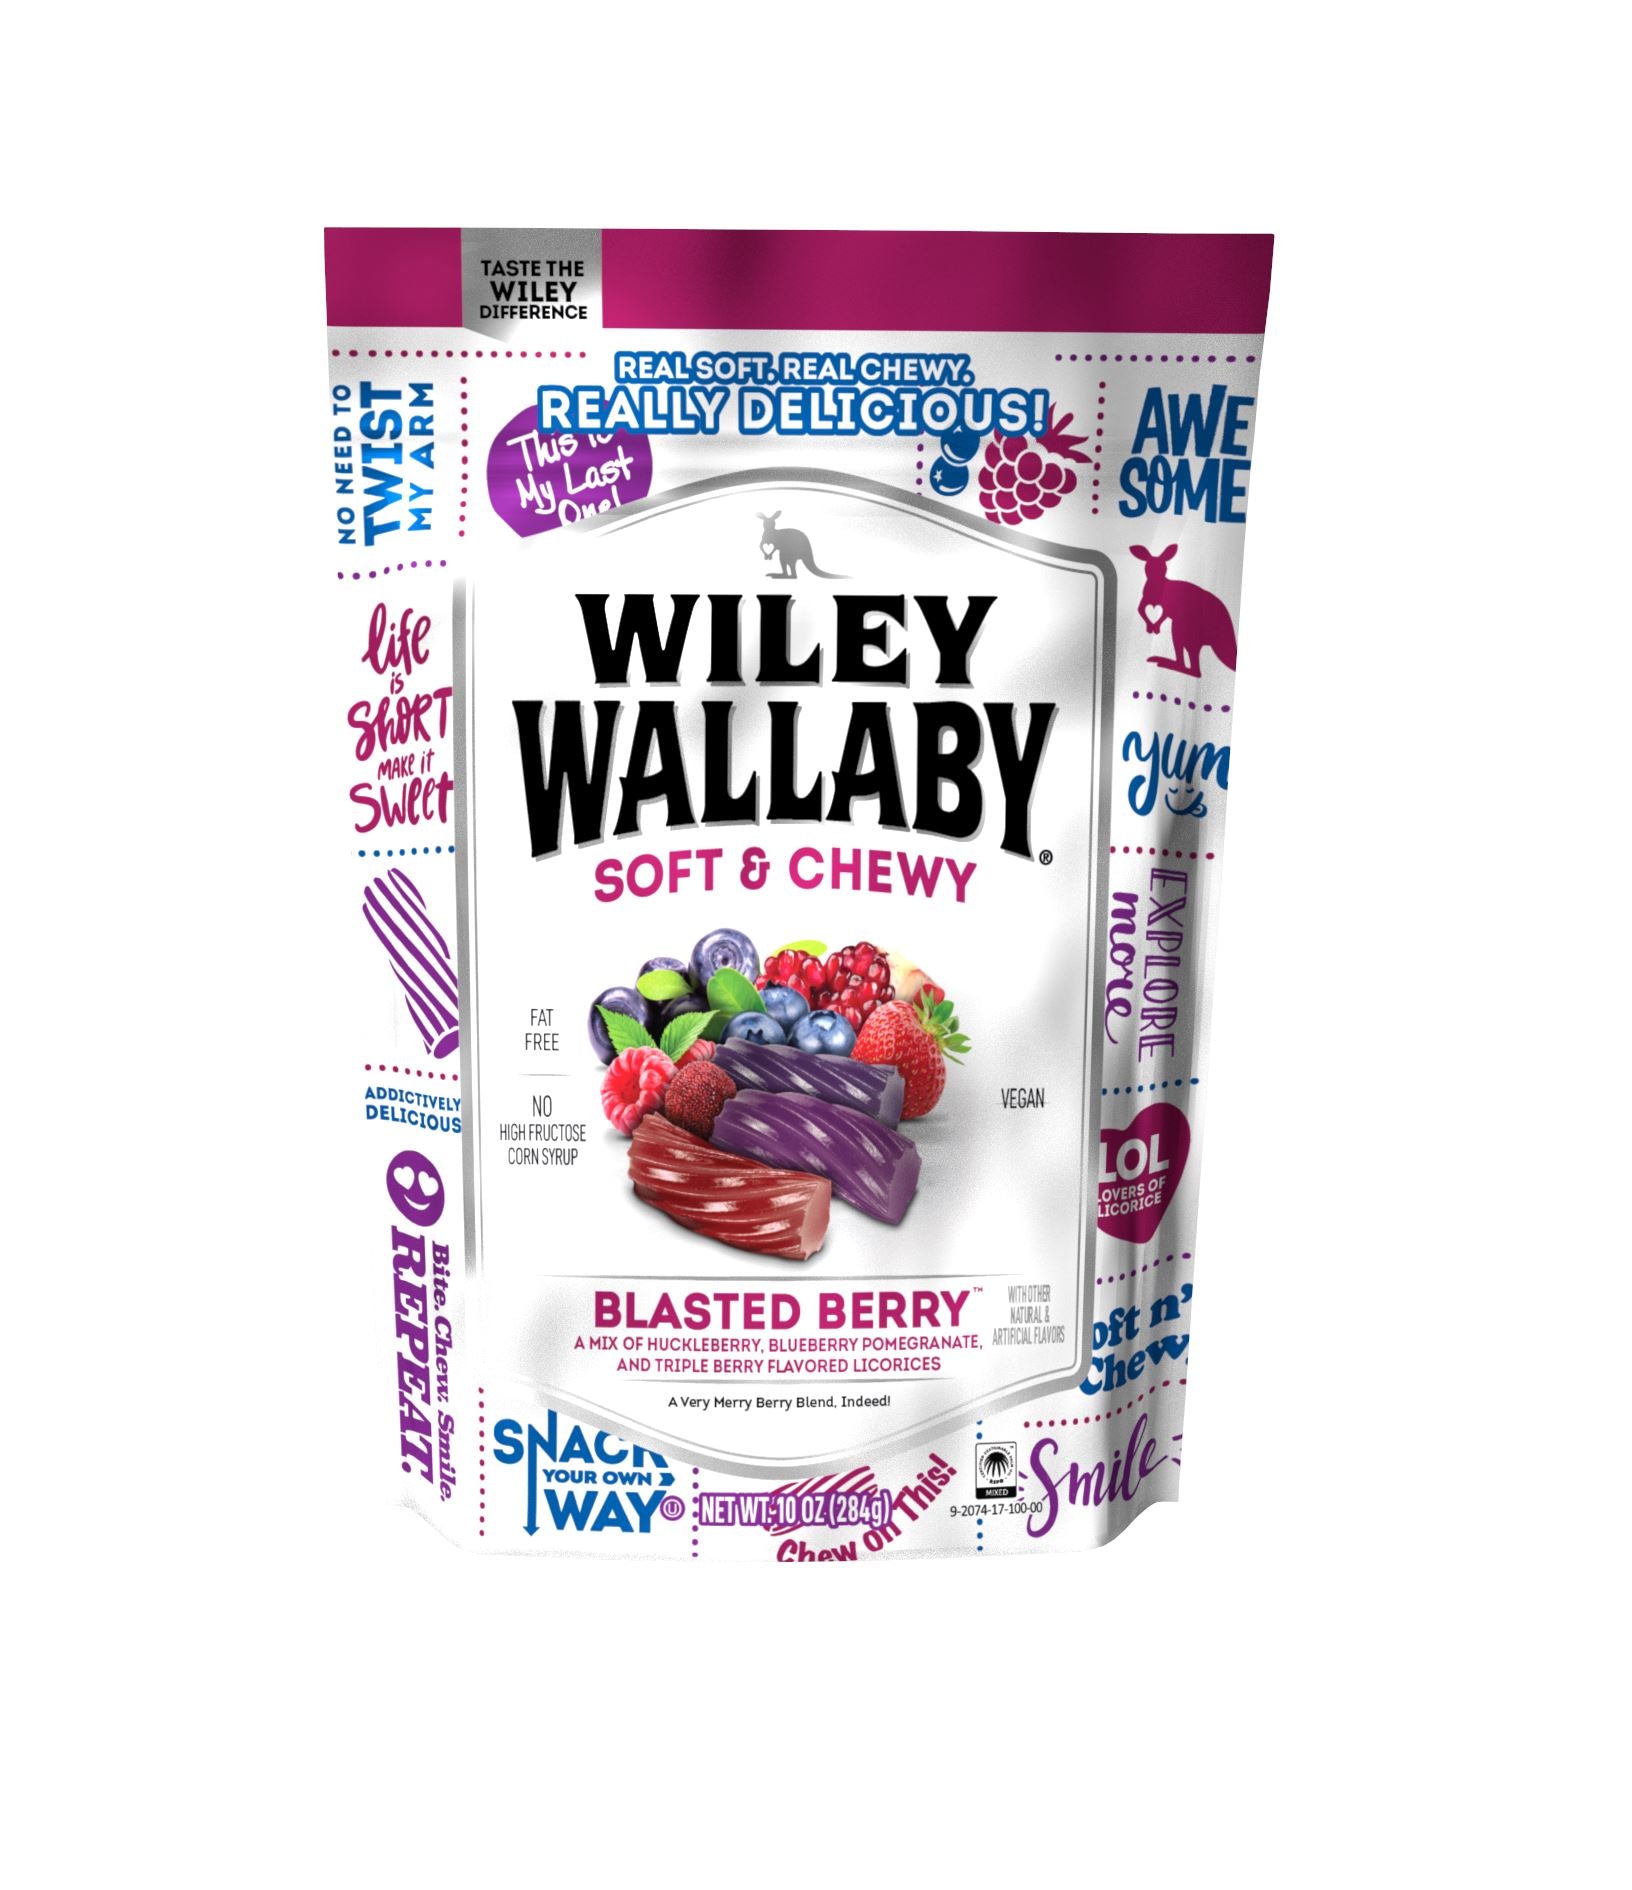 Wiley Wallaby Licorice Wiley Wallaby Blasted Berry 10 Ounce 